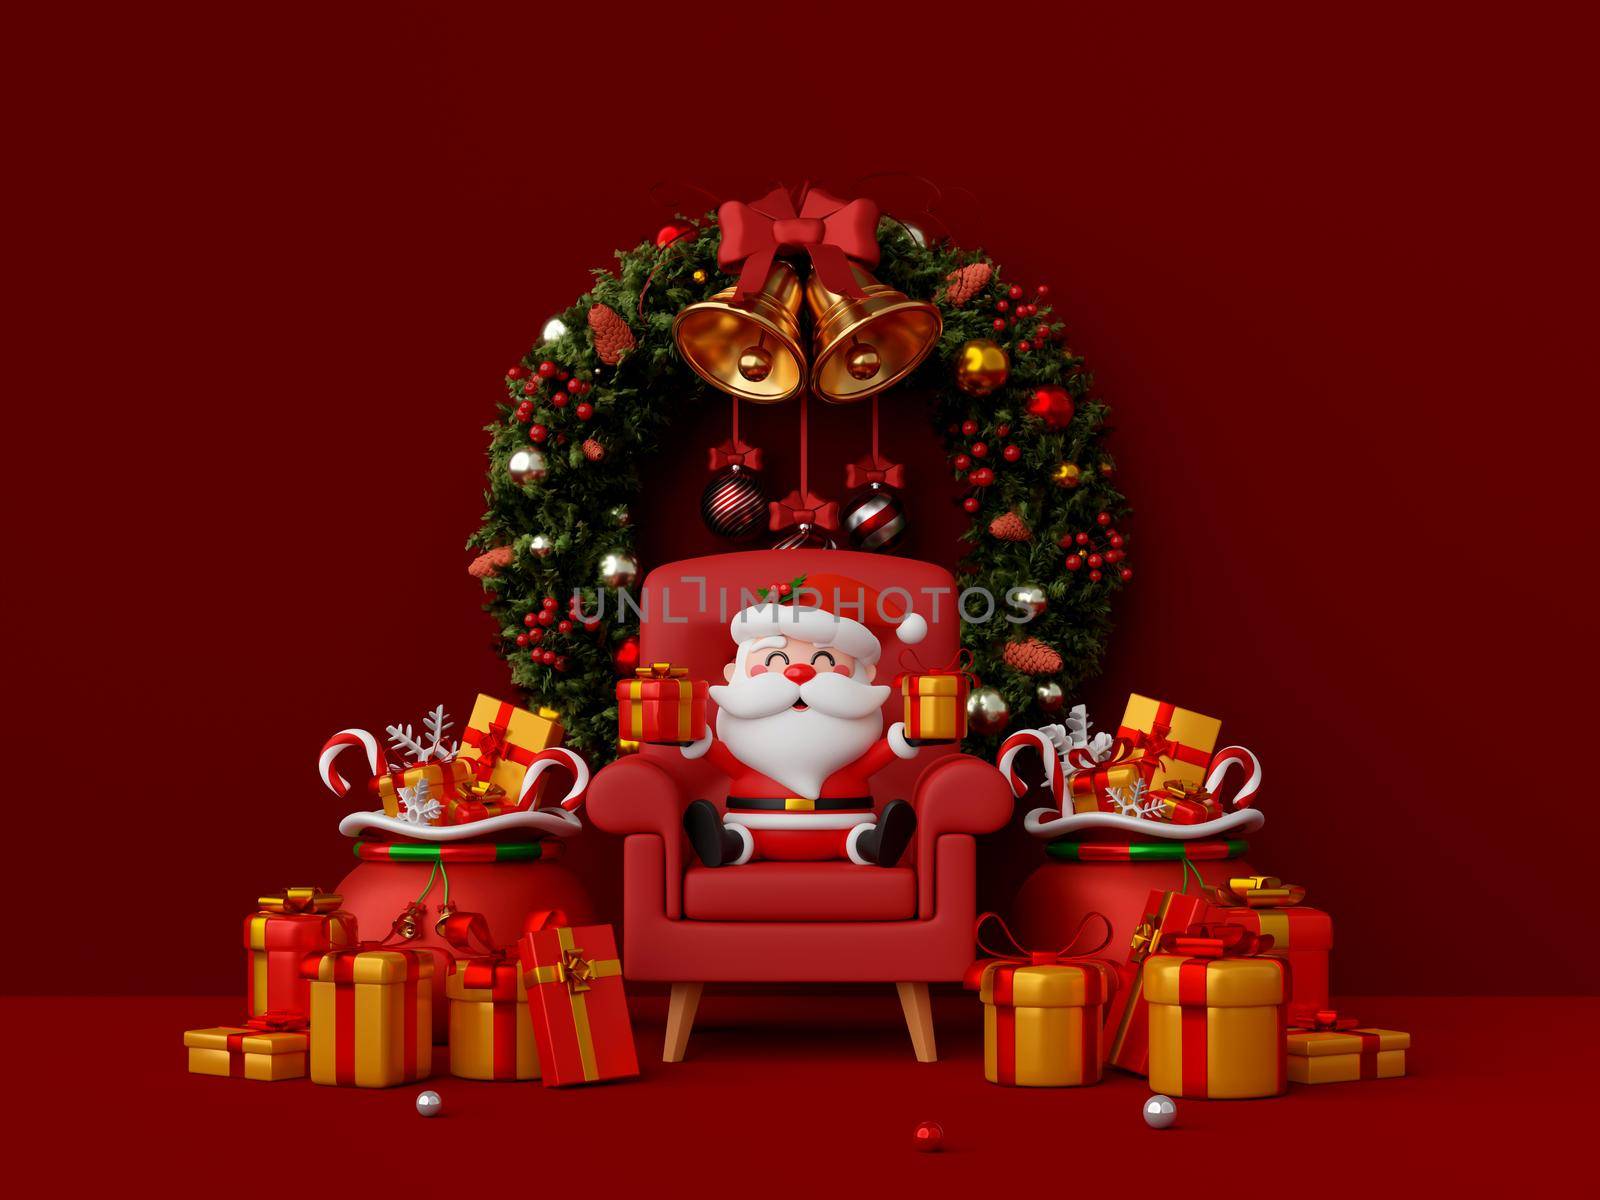 3d illustration Christmas banner of Santa Claus with Christmas wreath and gift box by nutzchotwarut